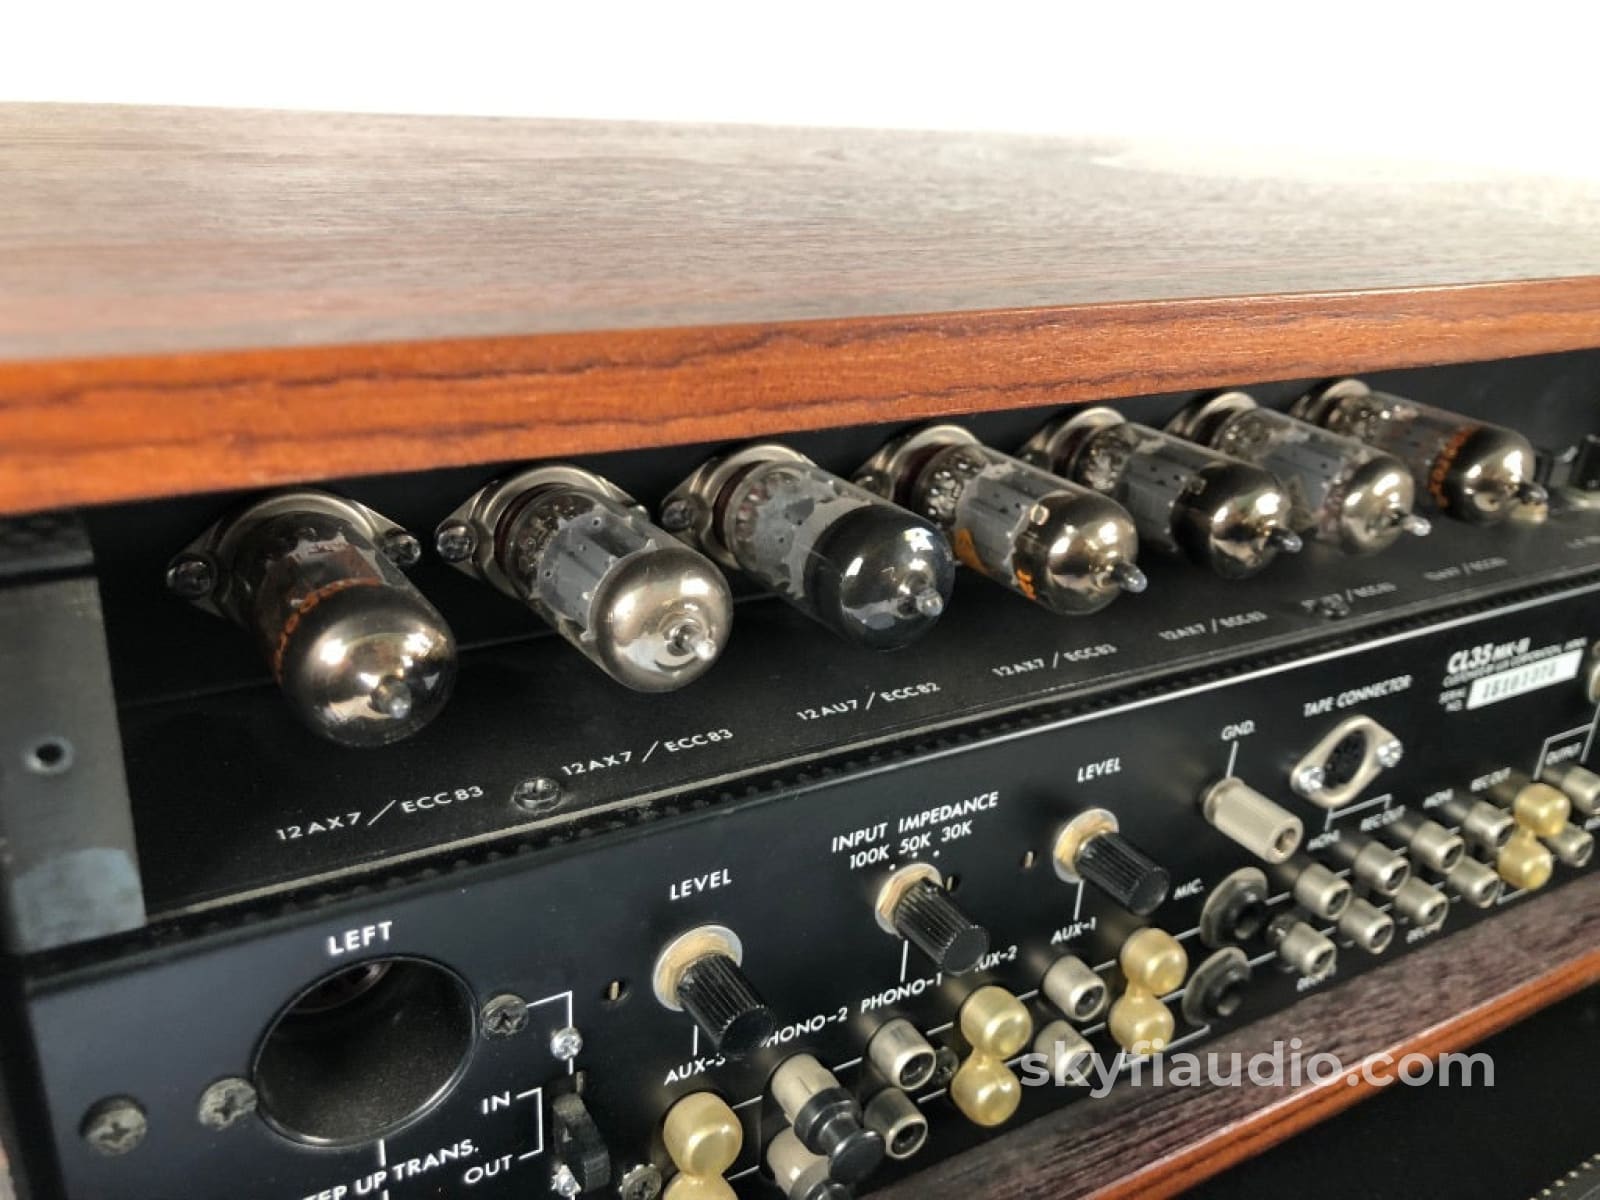 Luxman Cl35 Mkiii Tube Preamp New Old Stock Complete Collector Set! Preamplifier